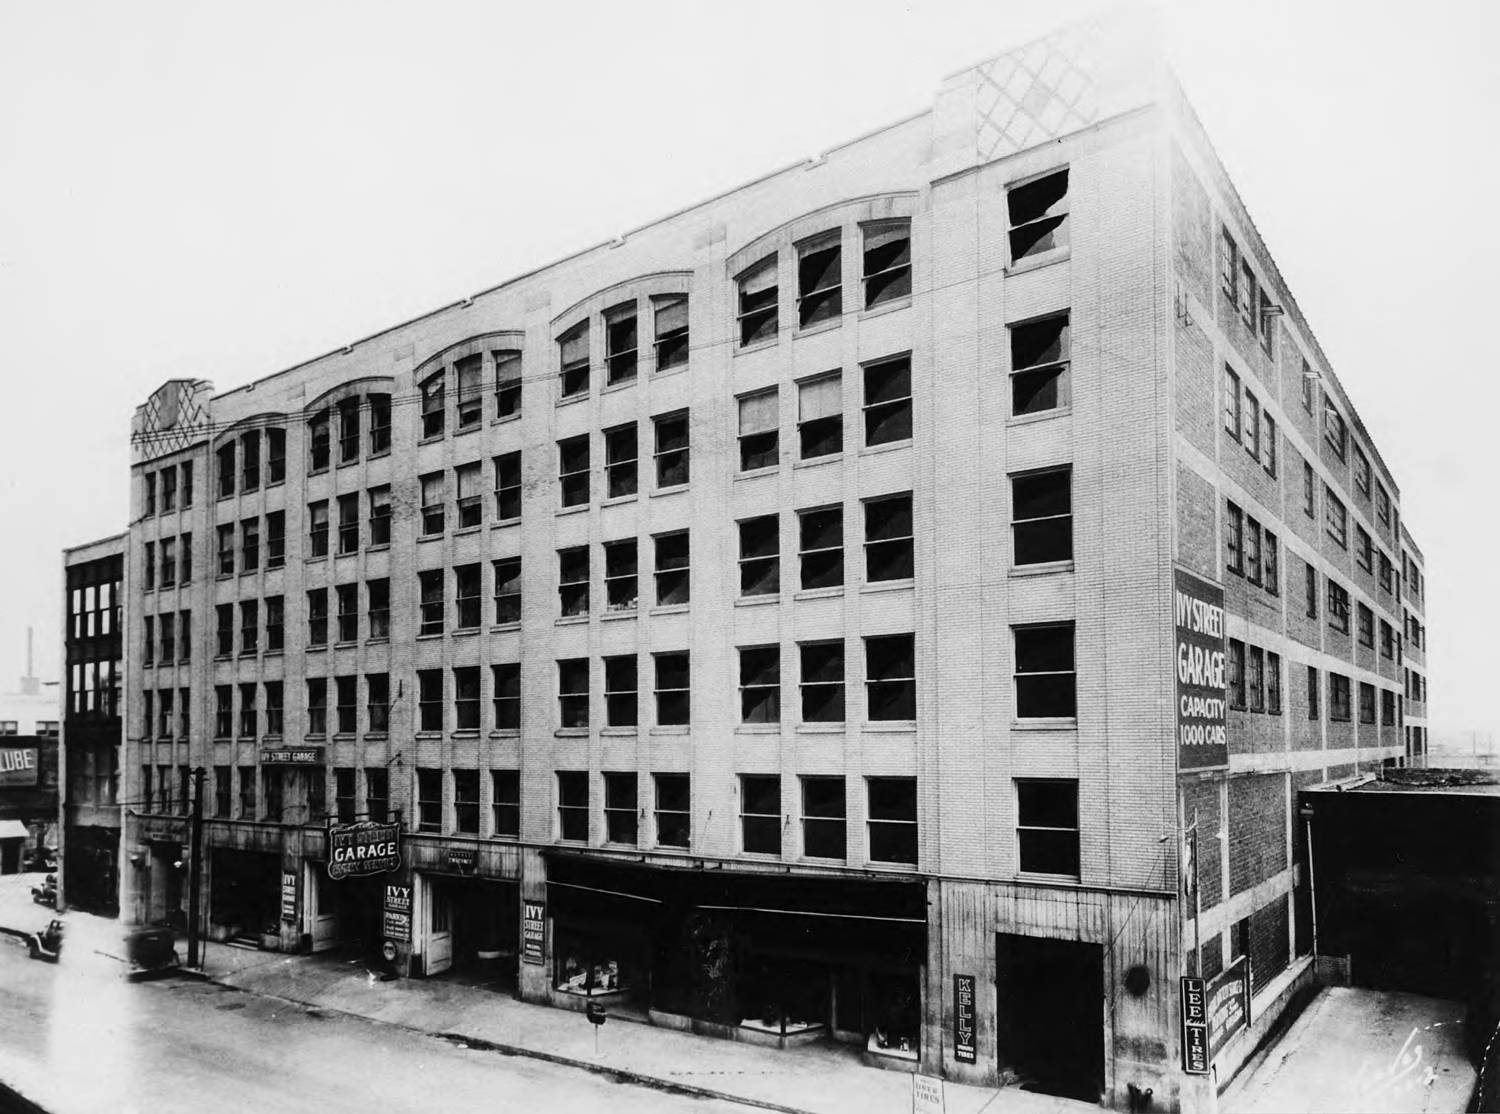 Photograph of the Bolling Jones Building, 1940s